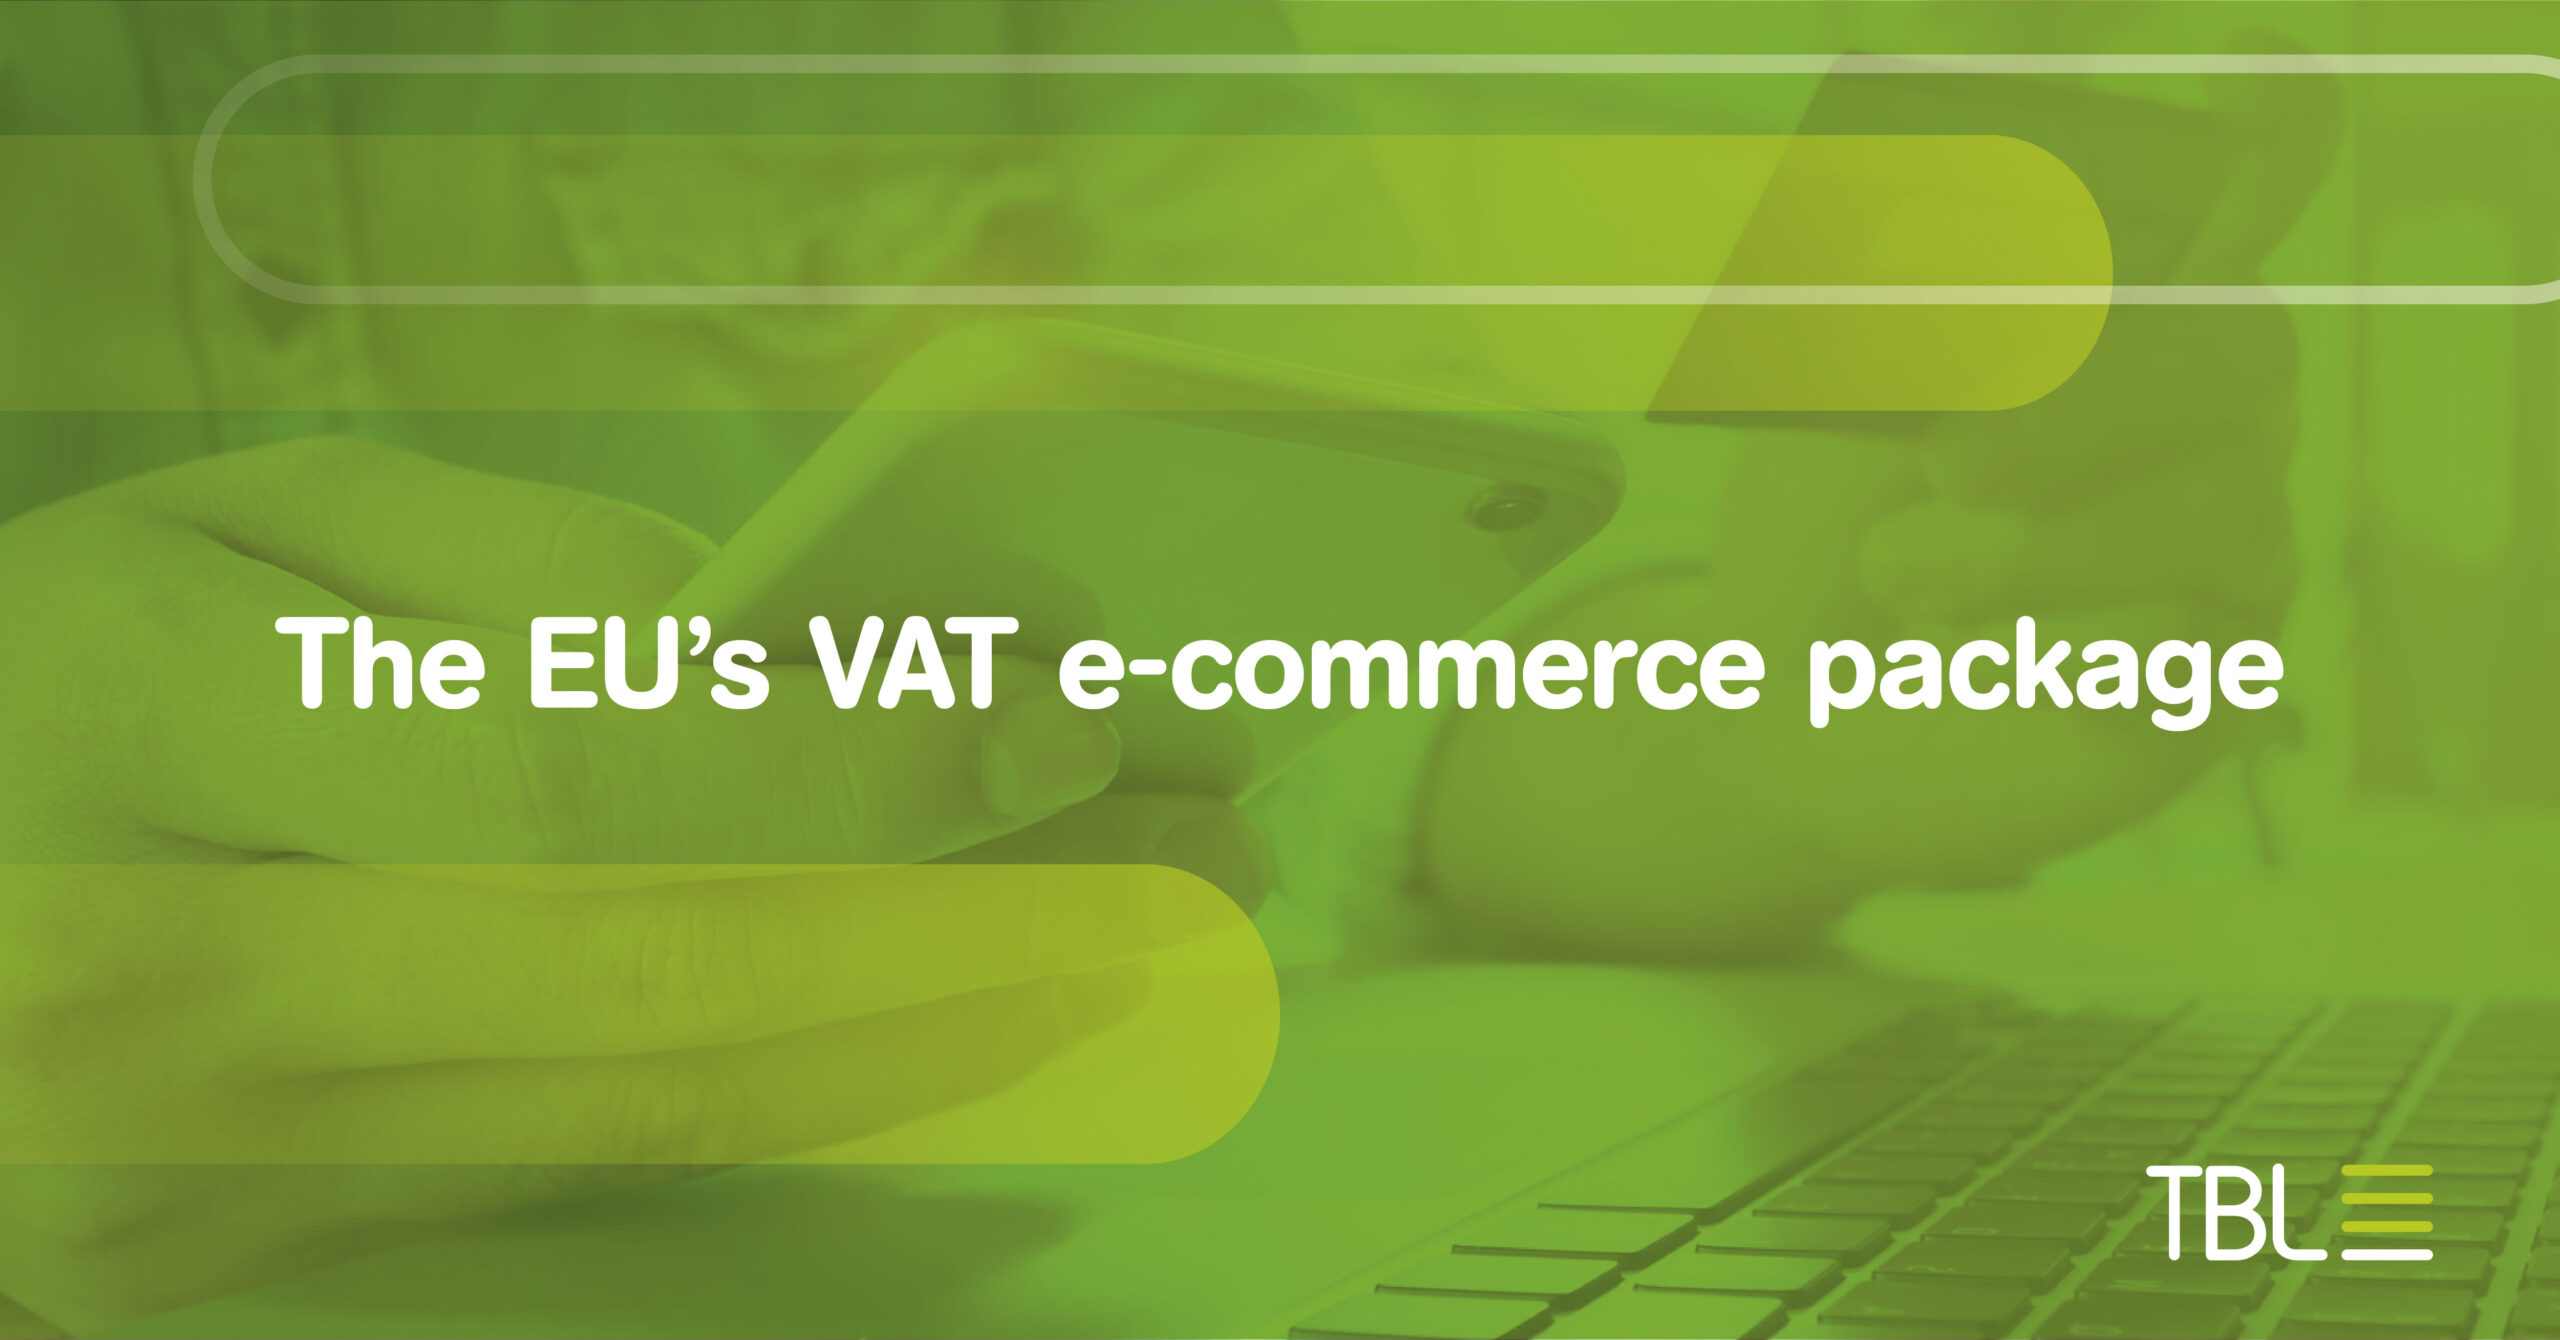 What is The EU’s new VAT e-commerce package?